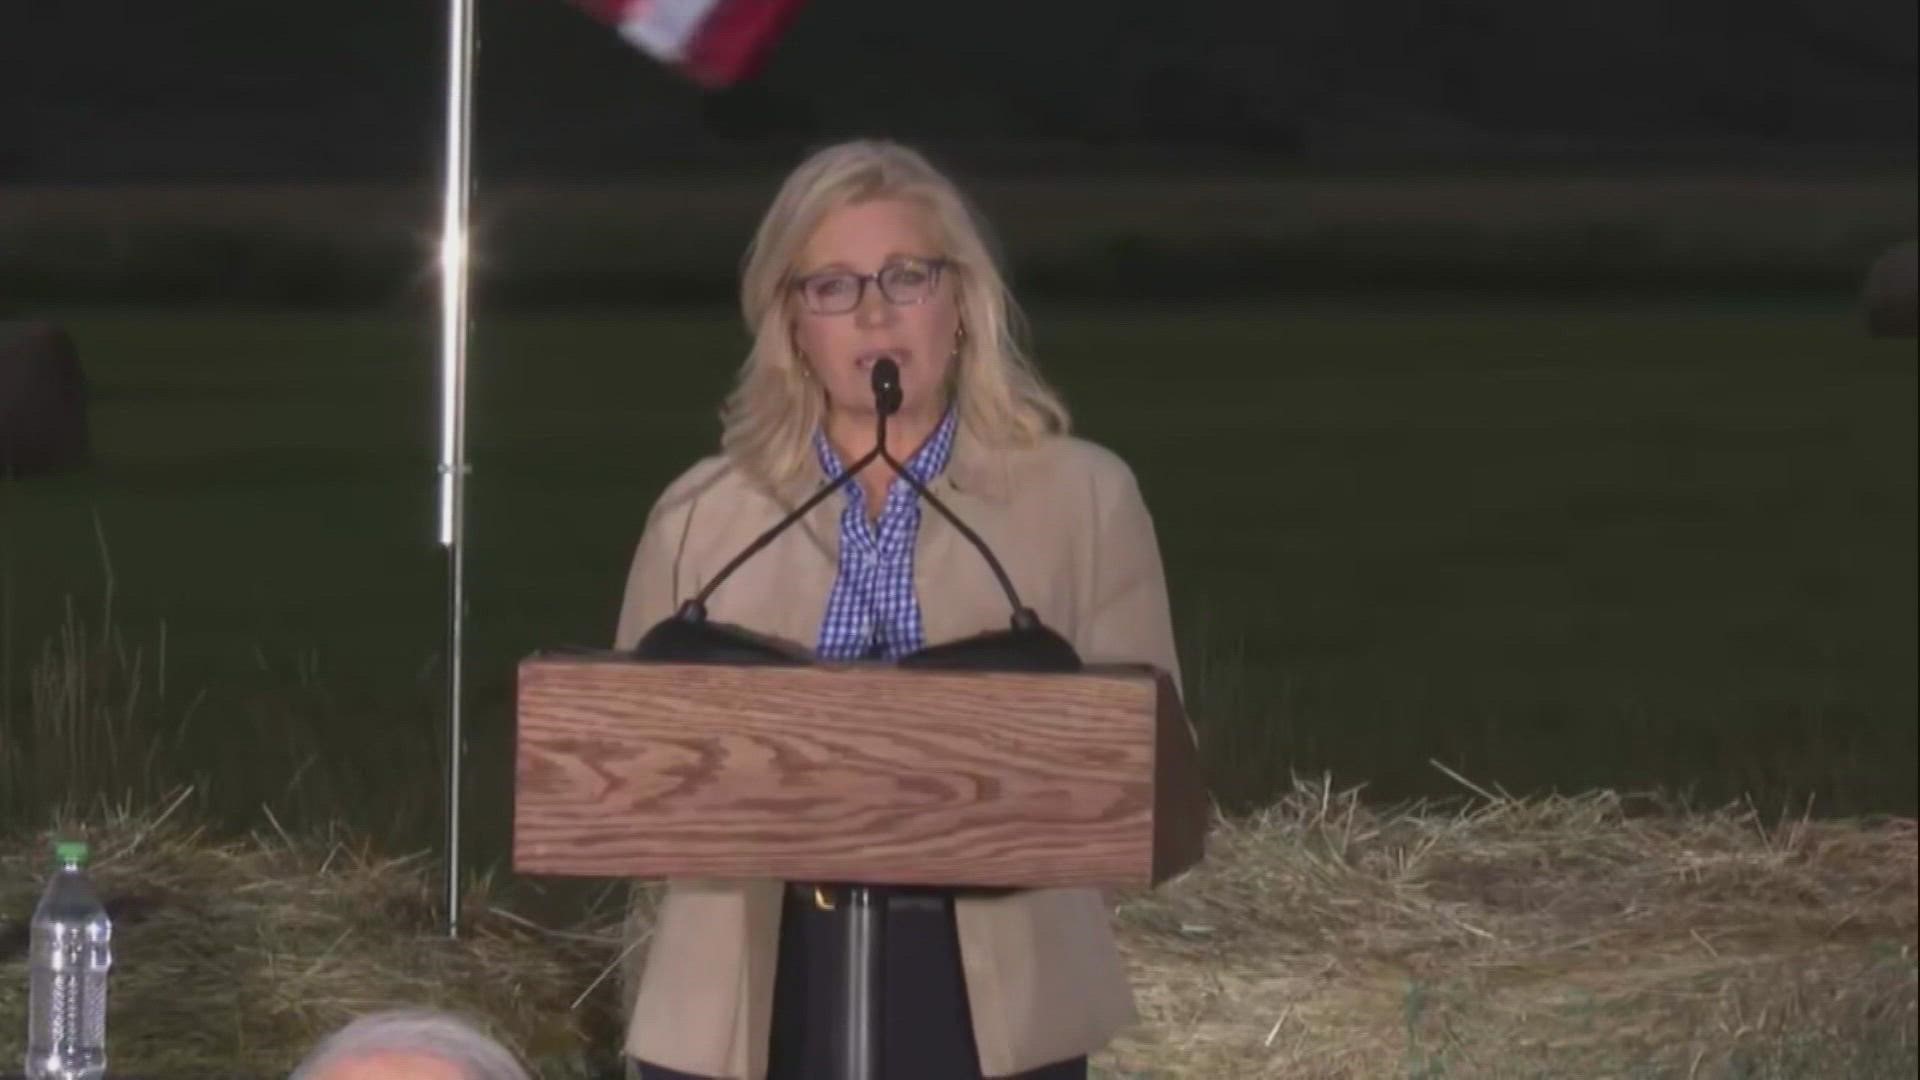 Wyoming Rep. Liz Cheney, Donald Trump’s fiercest Republican adversary in Congress, was defeated in a GOP primary Tuesday.